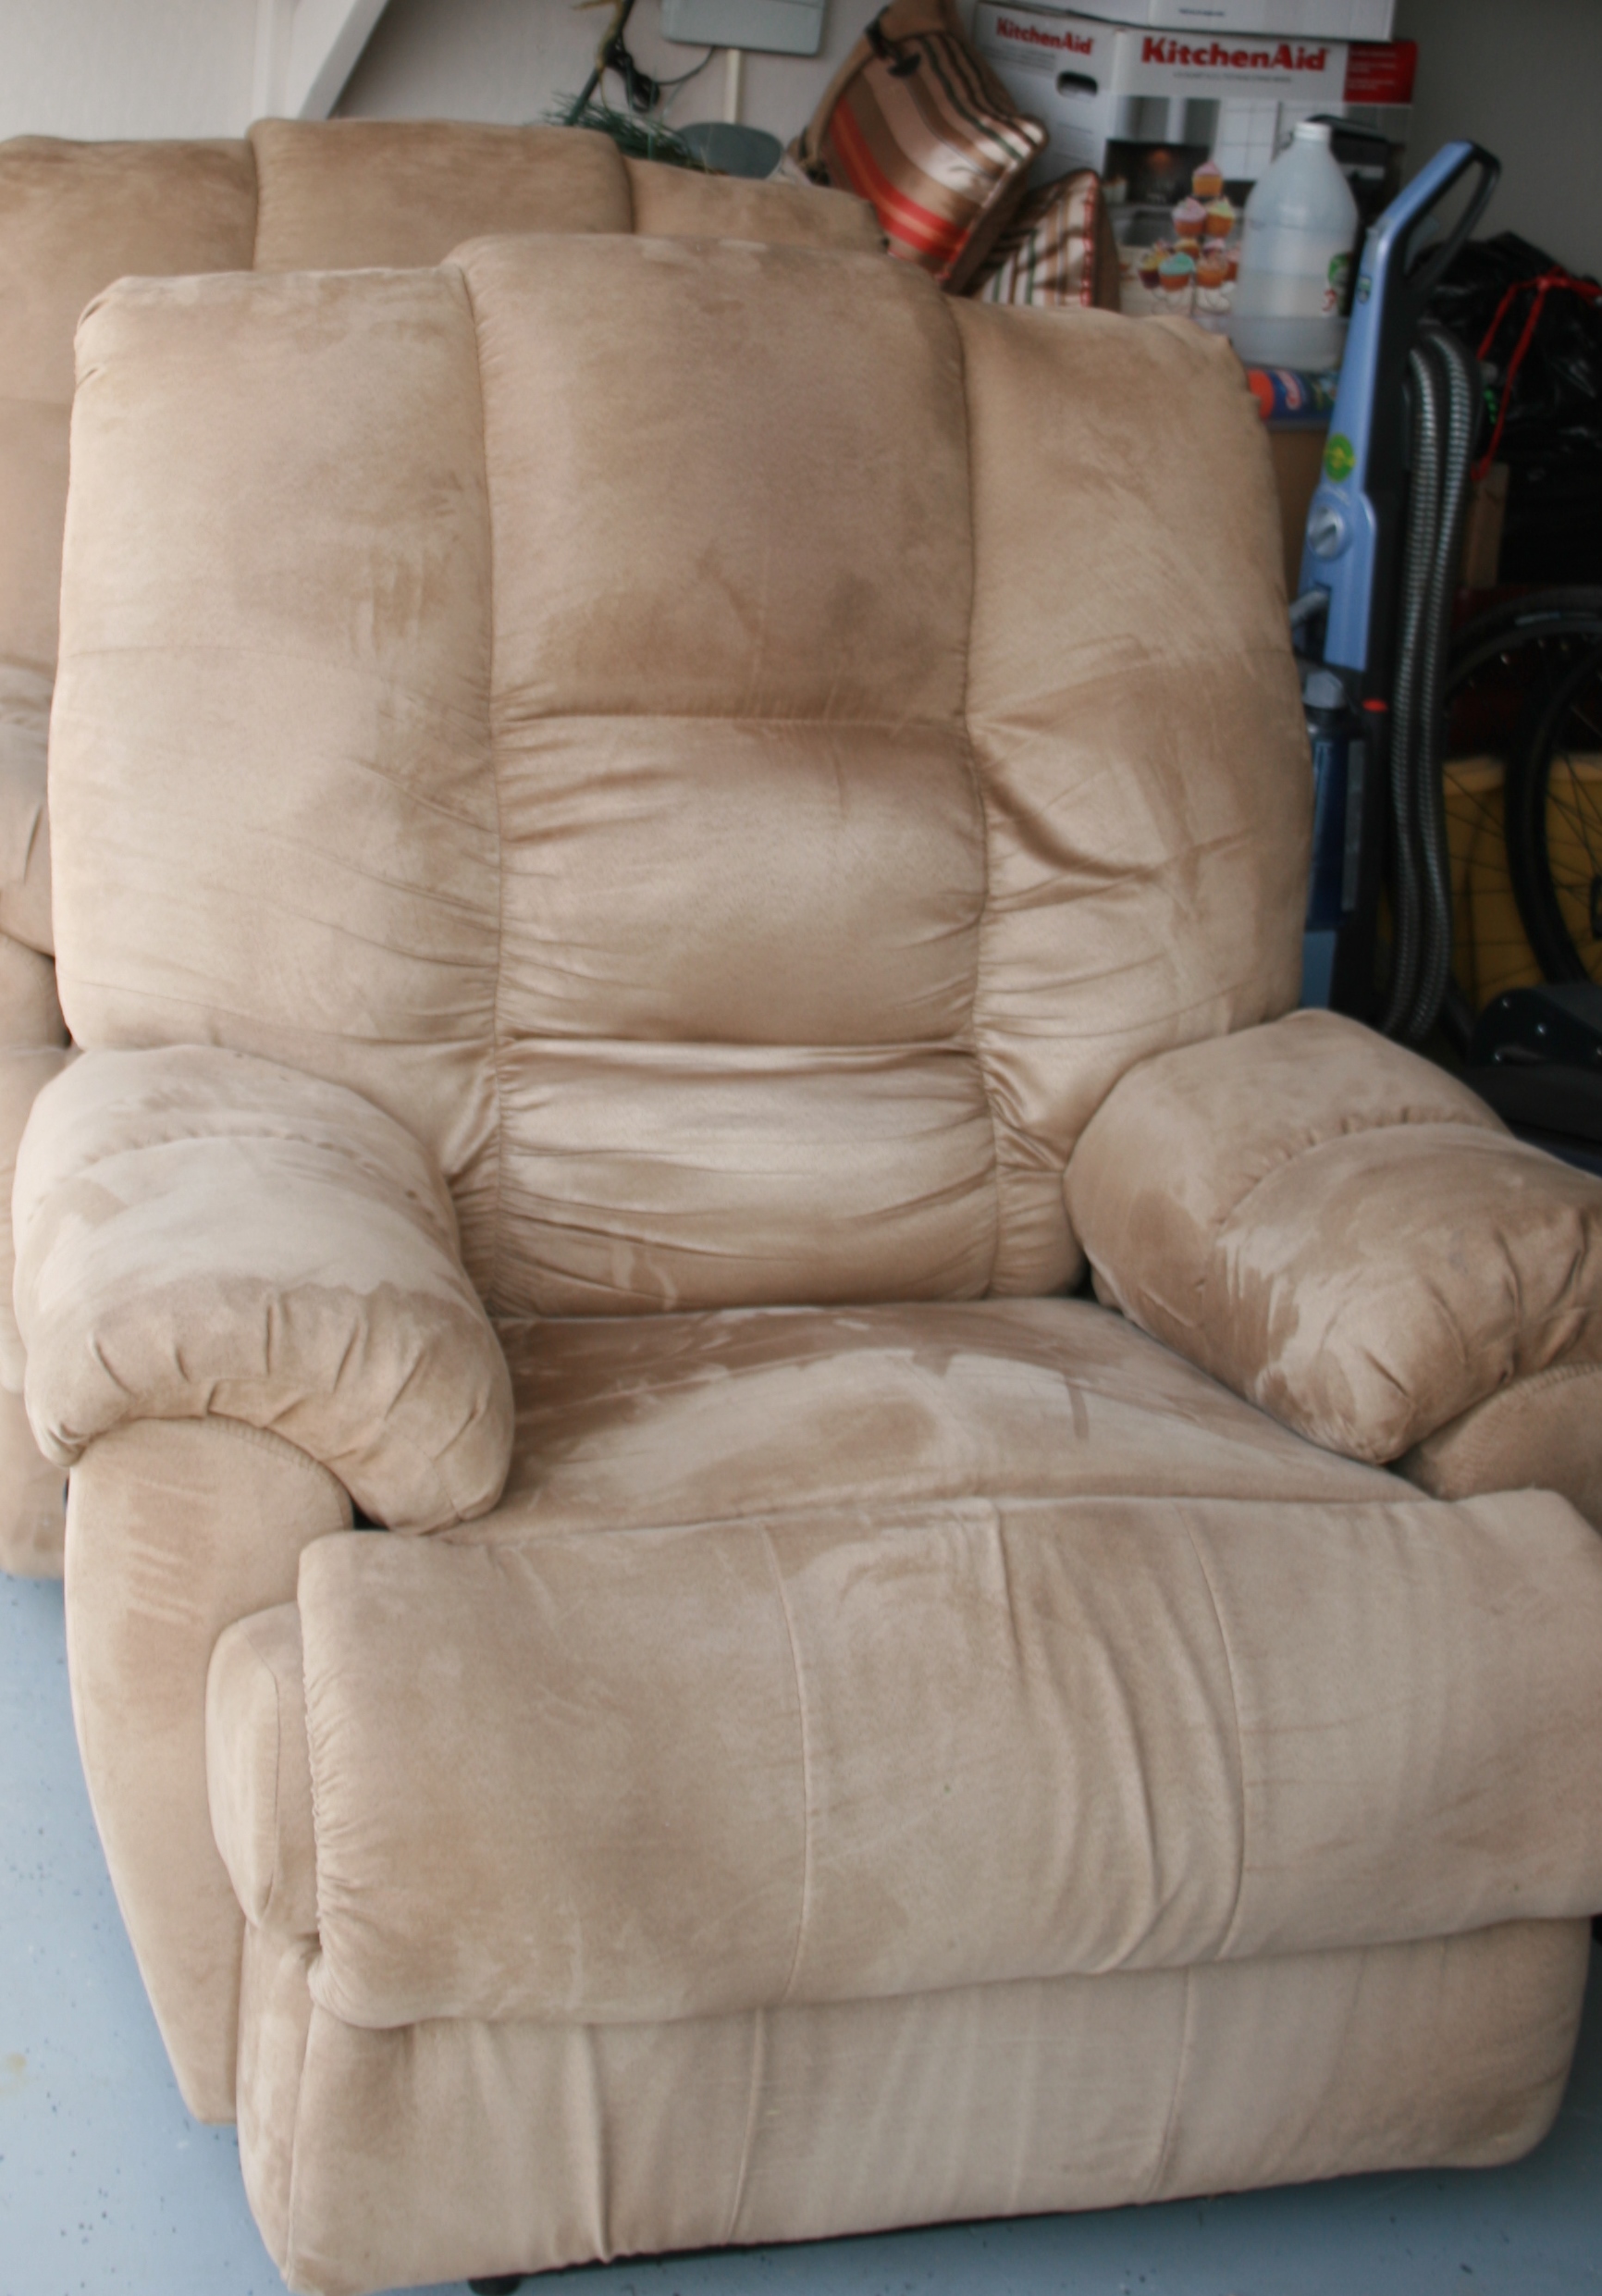 2 electric recliners